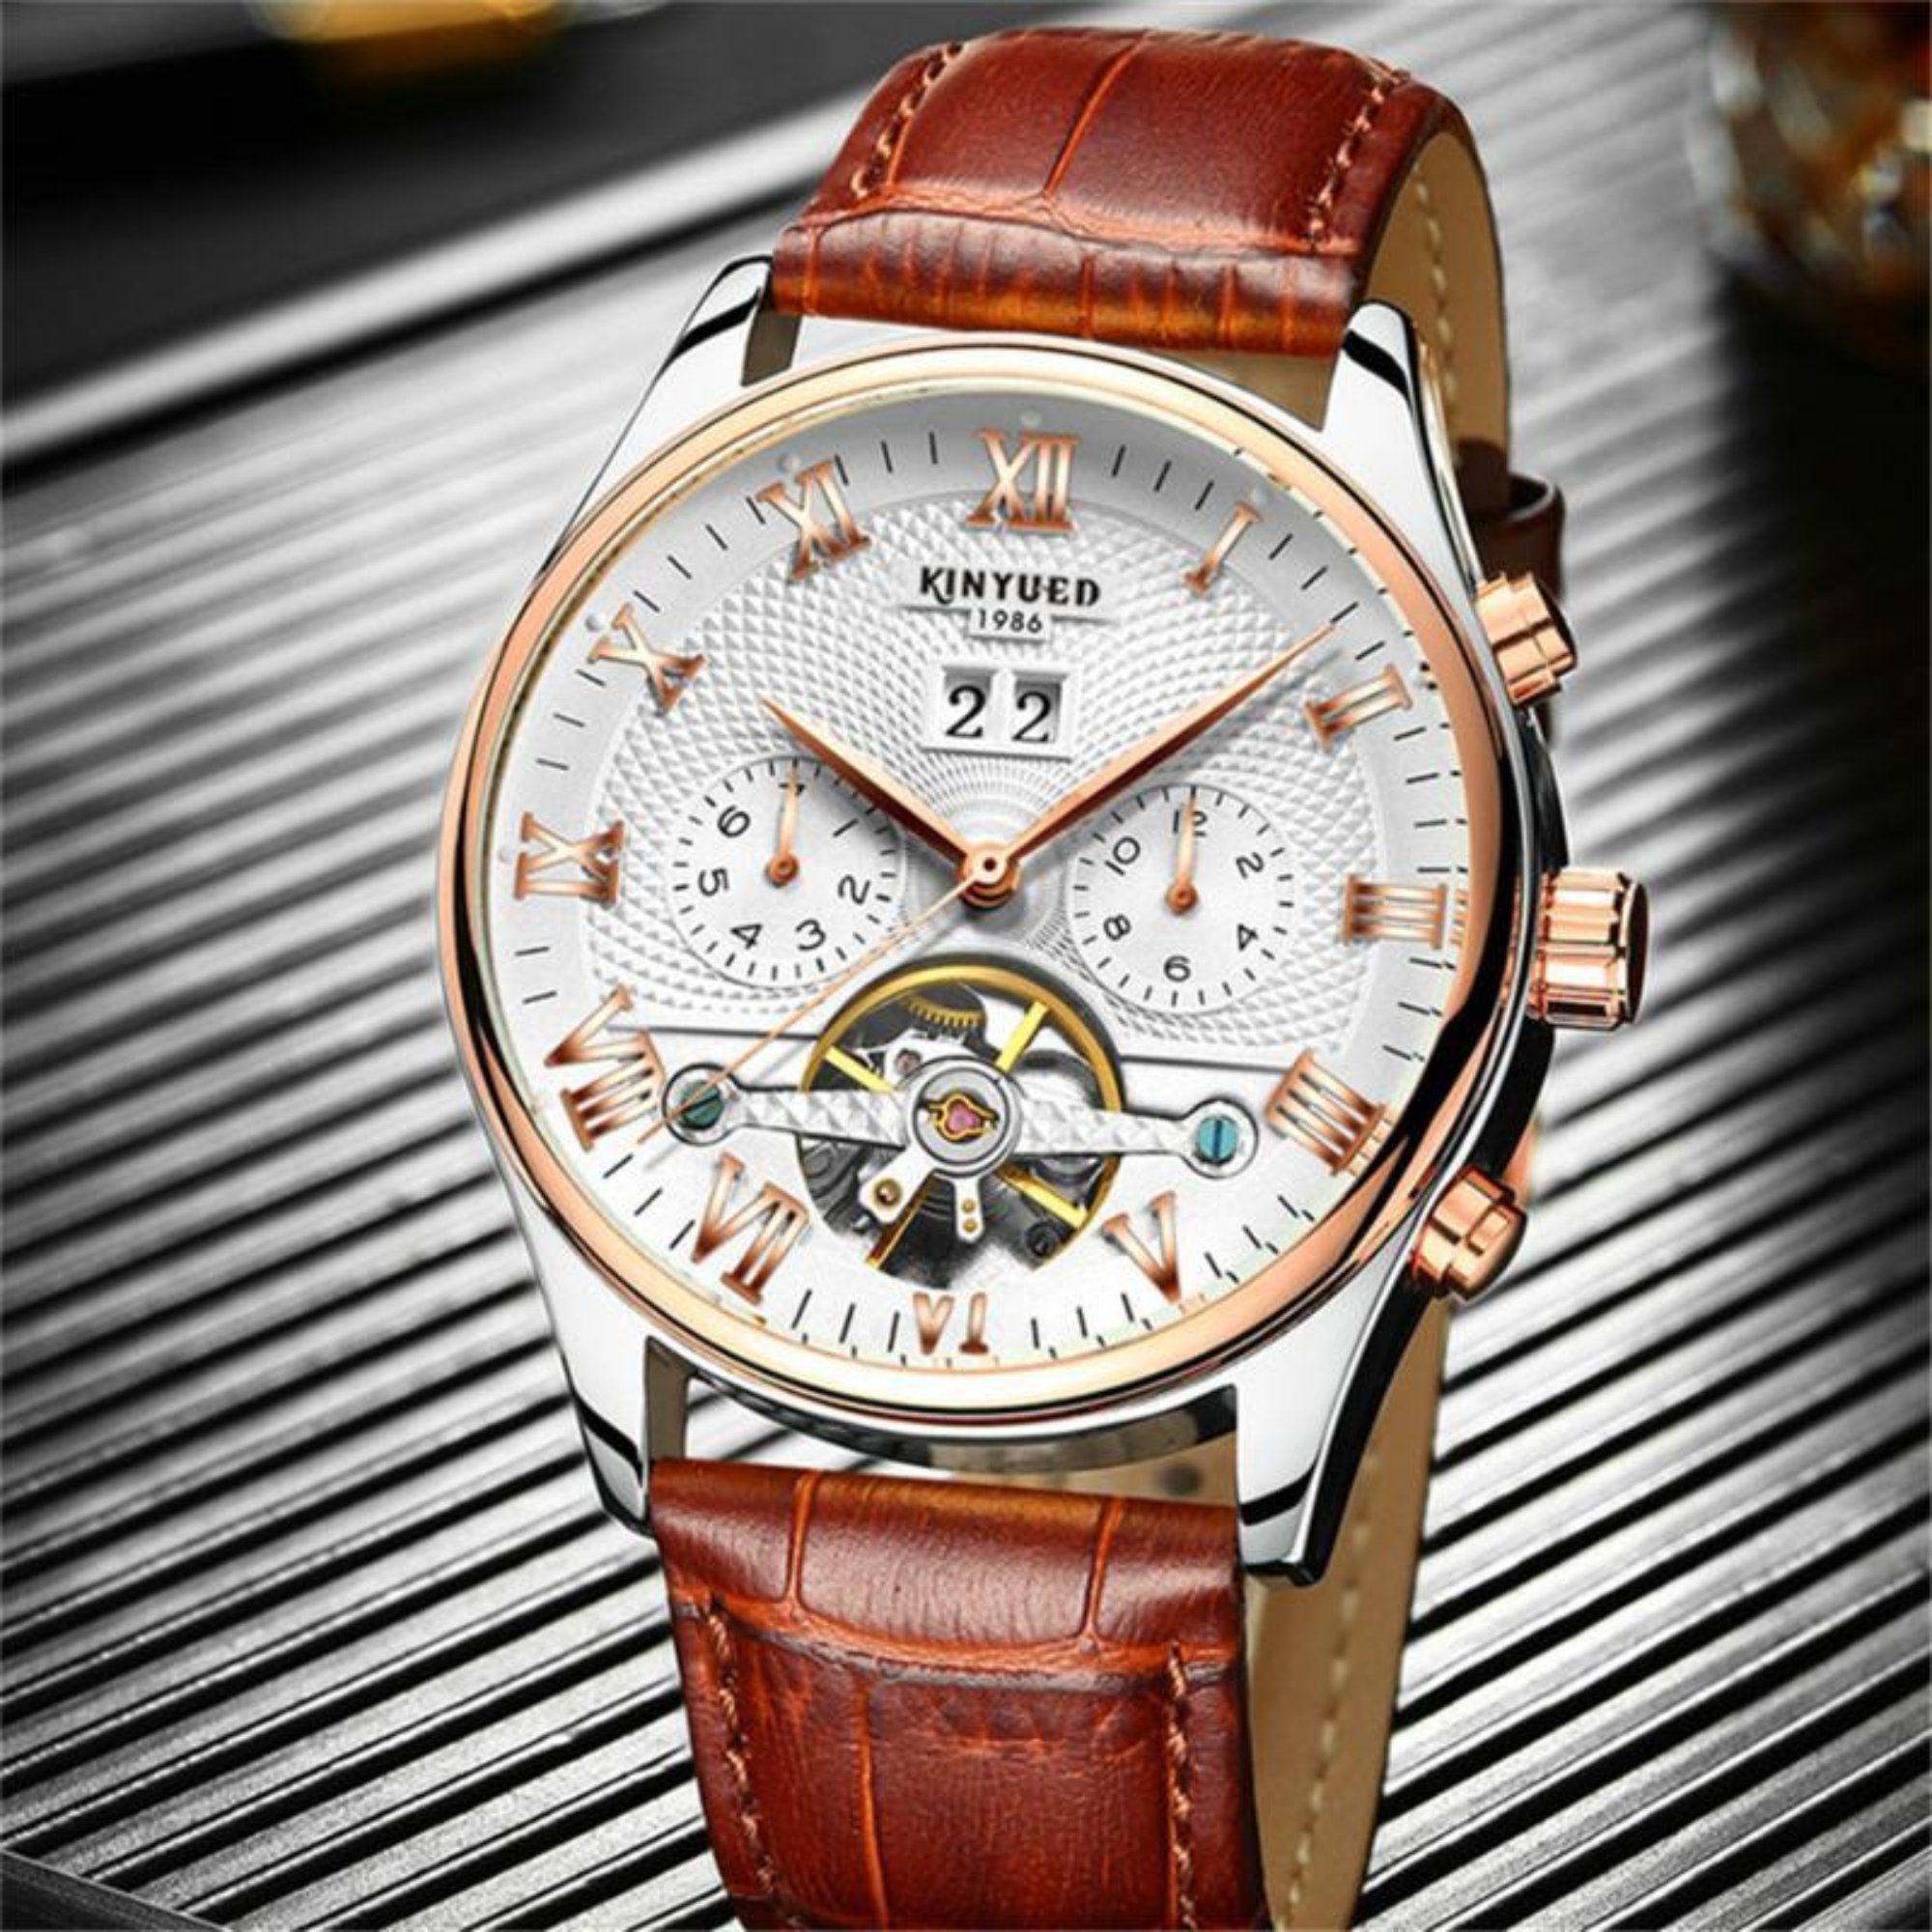 Swiss Tourbillon Mechanical Watch By KINYUED in brown displayed for gifting to man dad brother husband